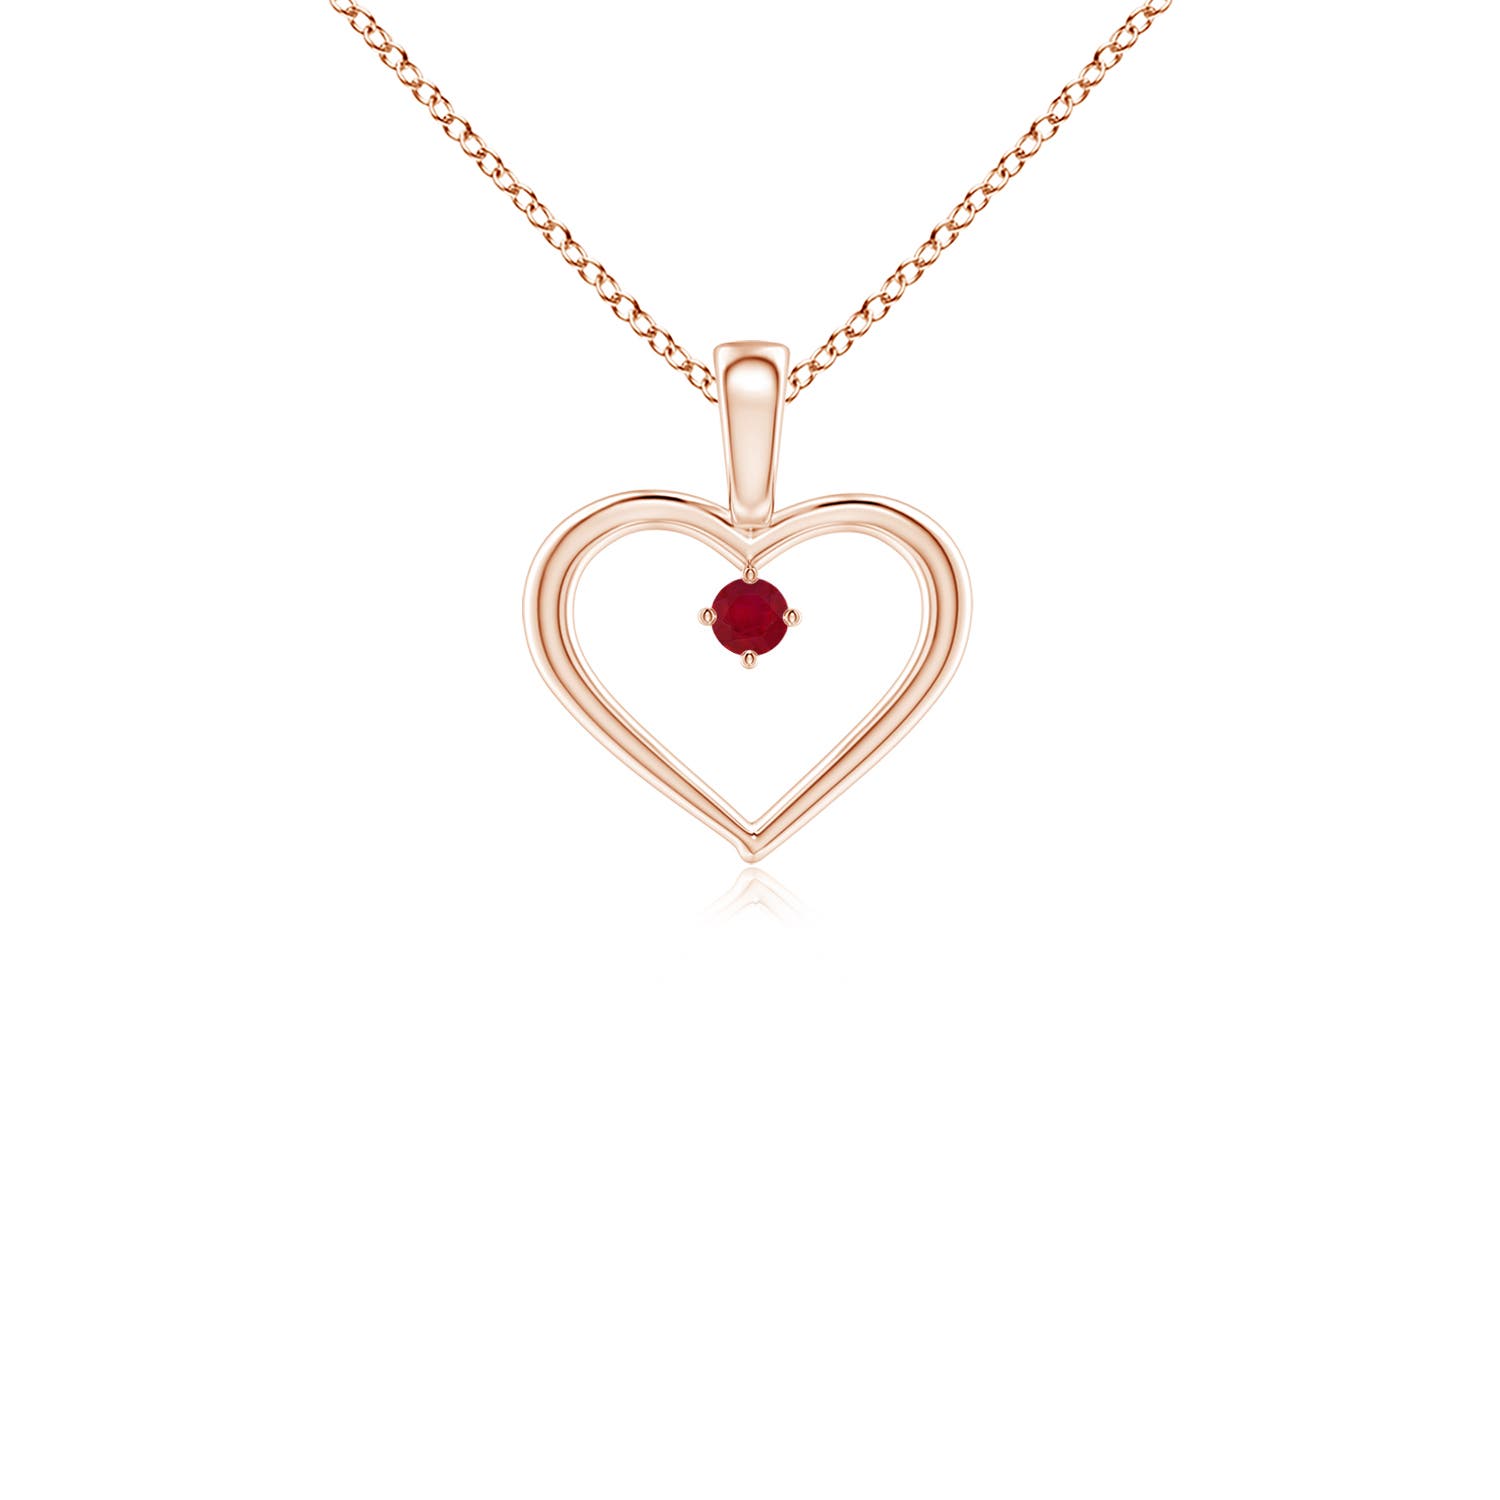 AA - Ruby / 0.09 CT / 14 KT Rose Gold